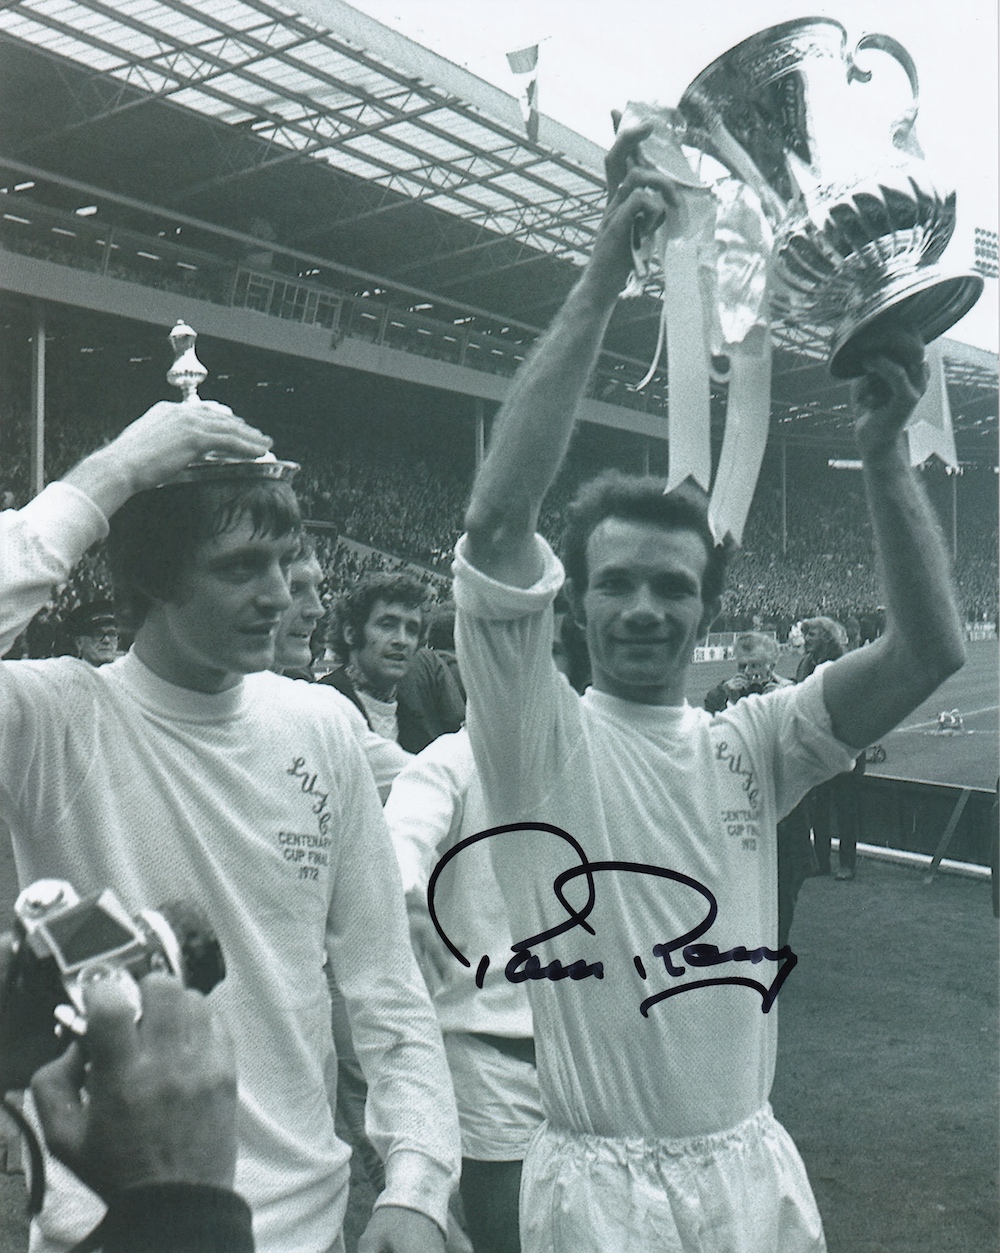 Paul Reaney Leeds United Legend (Selection of 4) Signed 10x8 inch Photo. Good condition. All